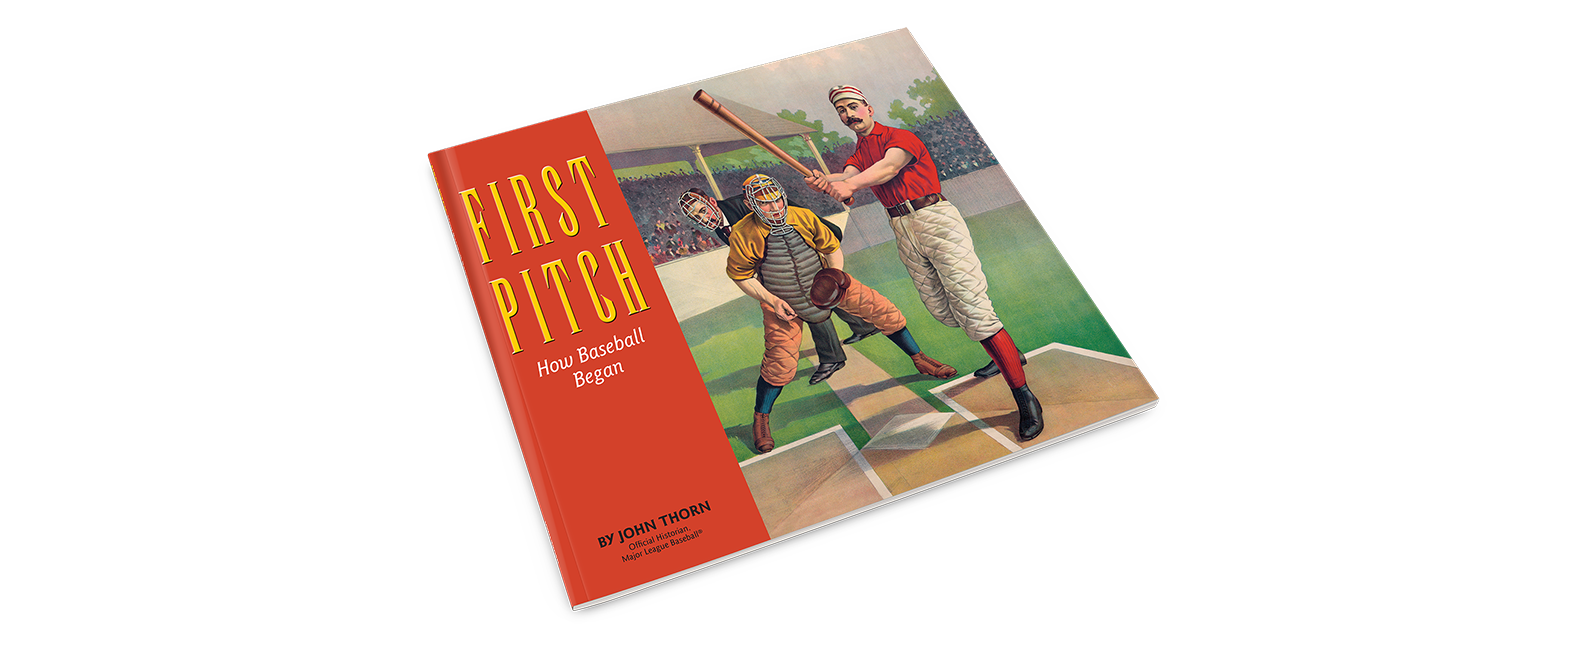 first-pitch-children's-trade-nonfiction-book-cover-2b.png